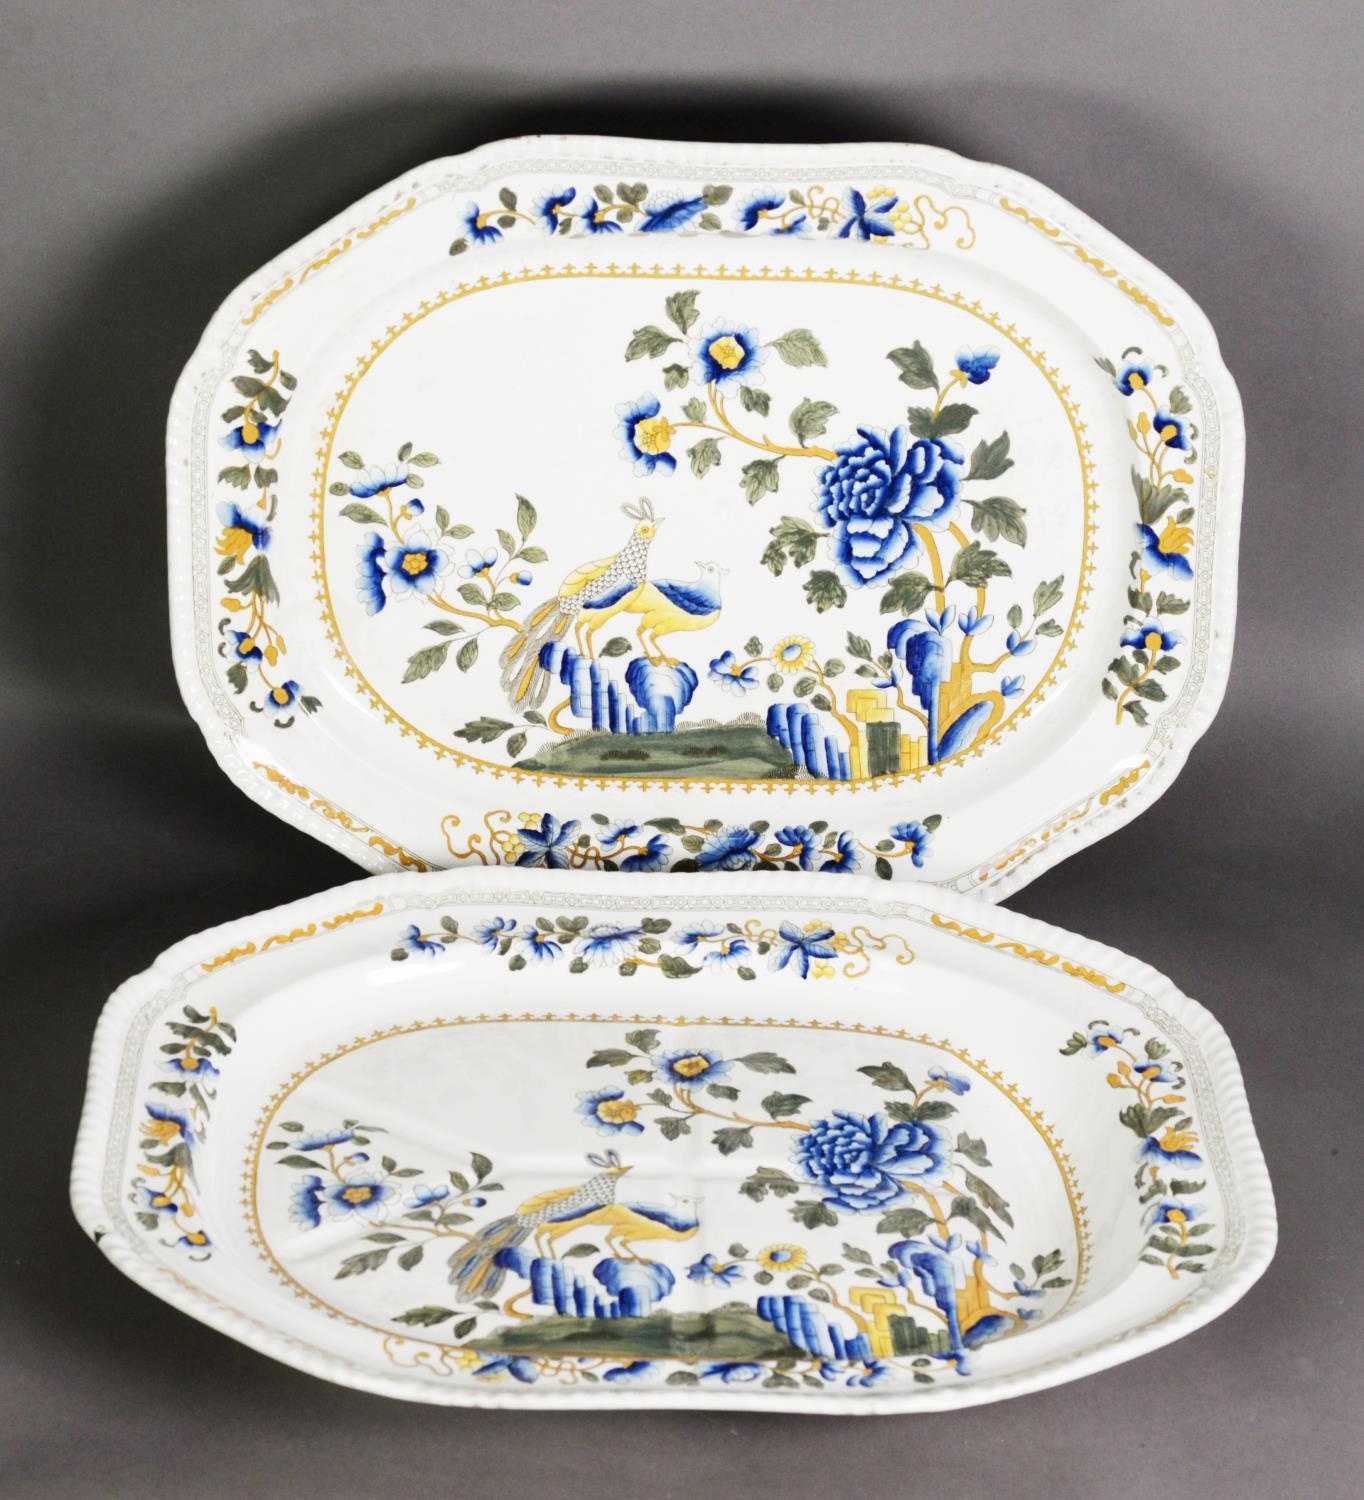 NINETEENTH CENTURY SPODE POTTERY TURKEY MEAT PLATE AND MATCHING PLATE, each of canted oblong form